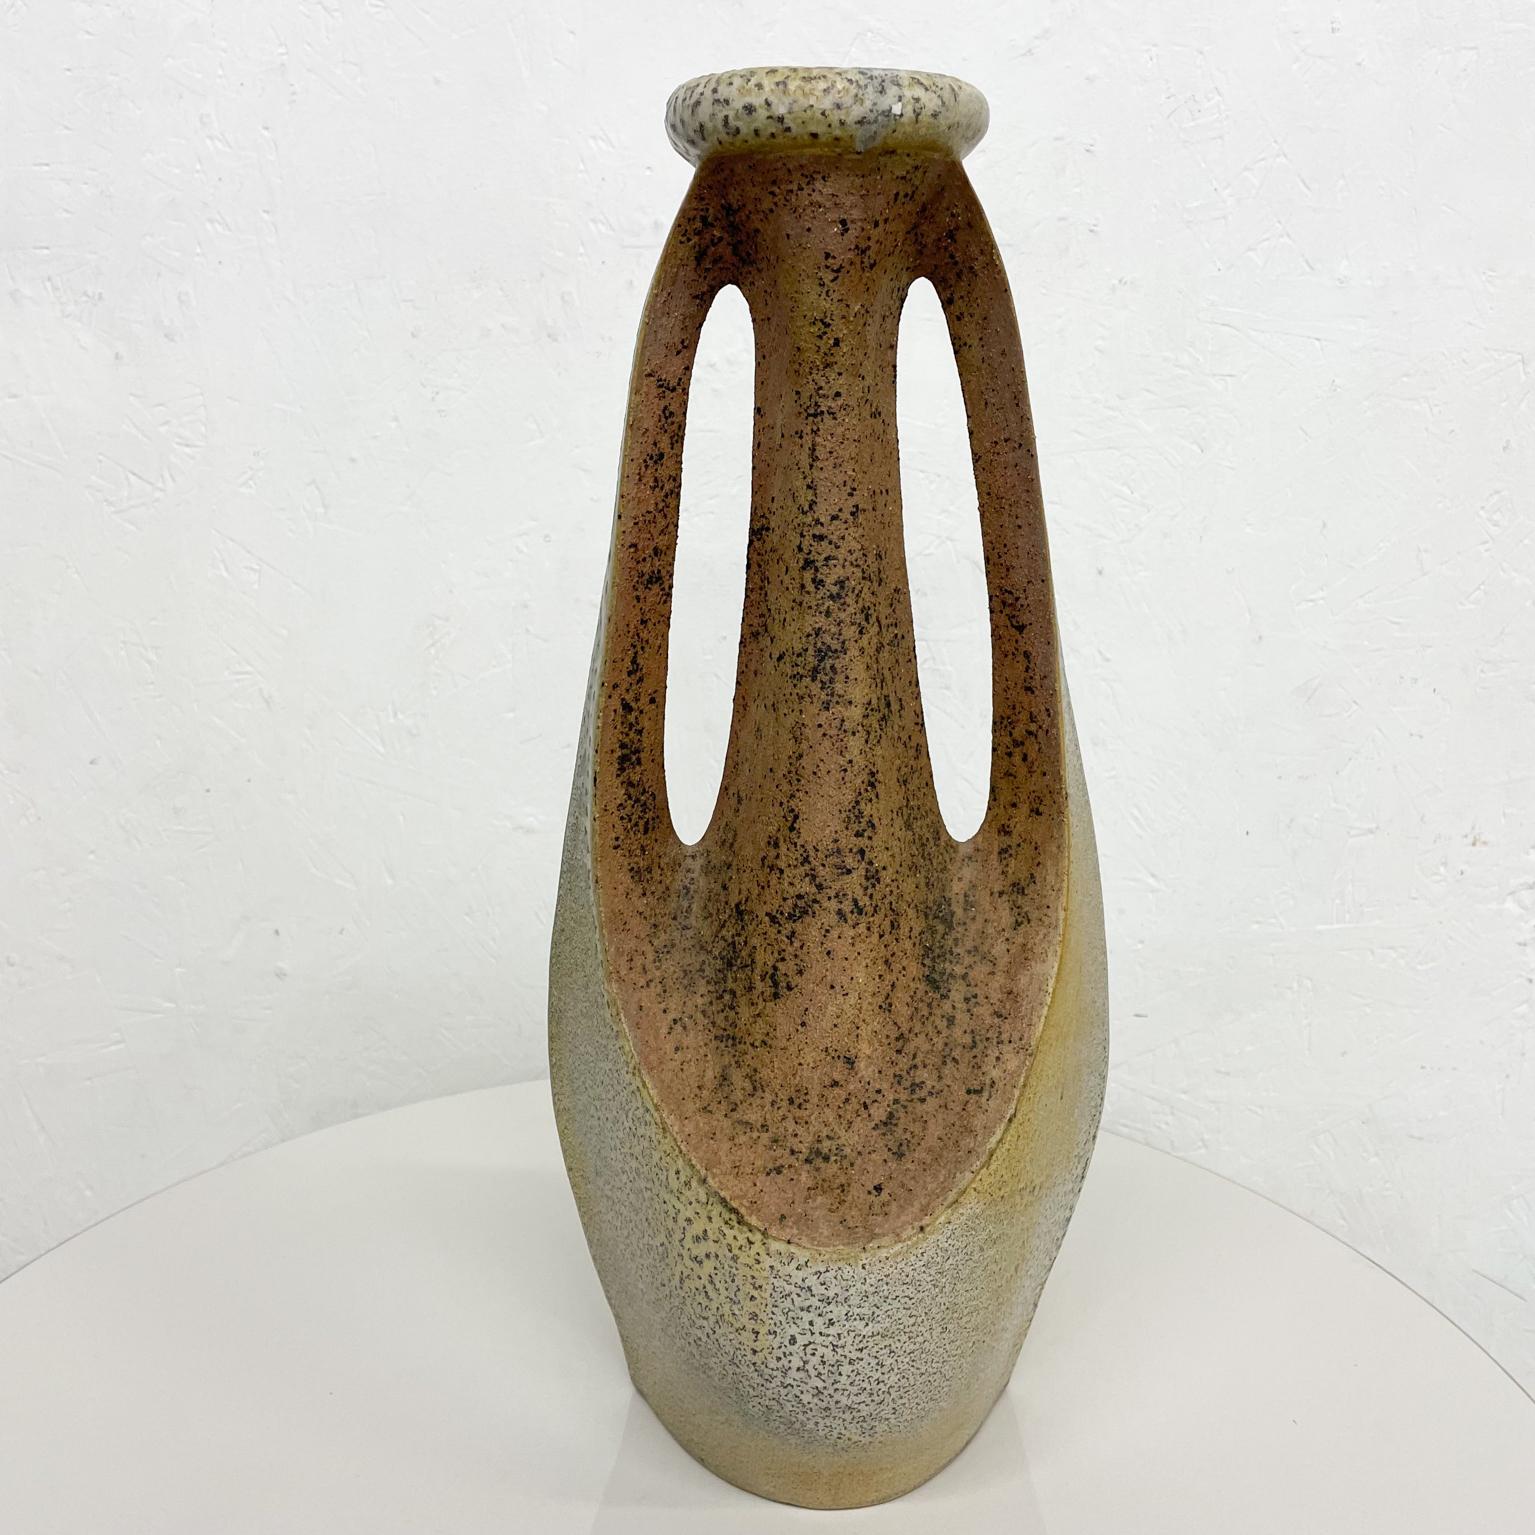 Sculptural vase
Brazil Speckled Pottery artist signed Chico Ribeiro Munoz, Brazilian artist.
Modernist pottery, sculptural ceramic vase
17 H x 7.25 W x 7 D approximately
Preowned original unrestored vintage condition
See images provided.